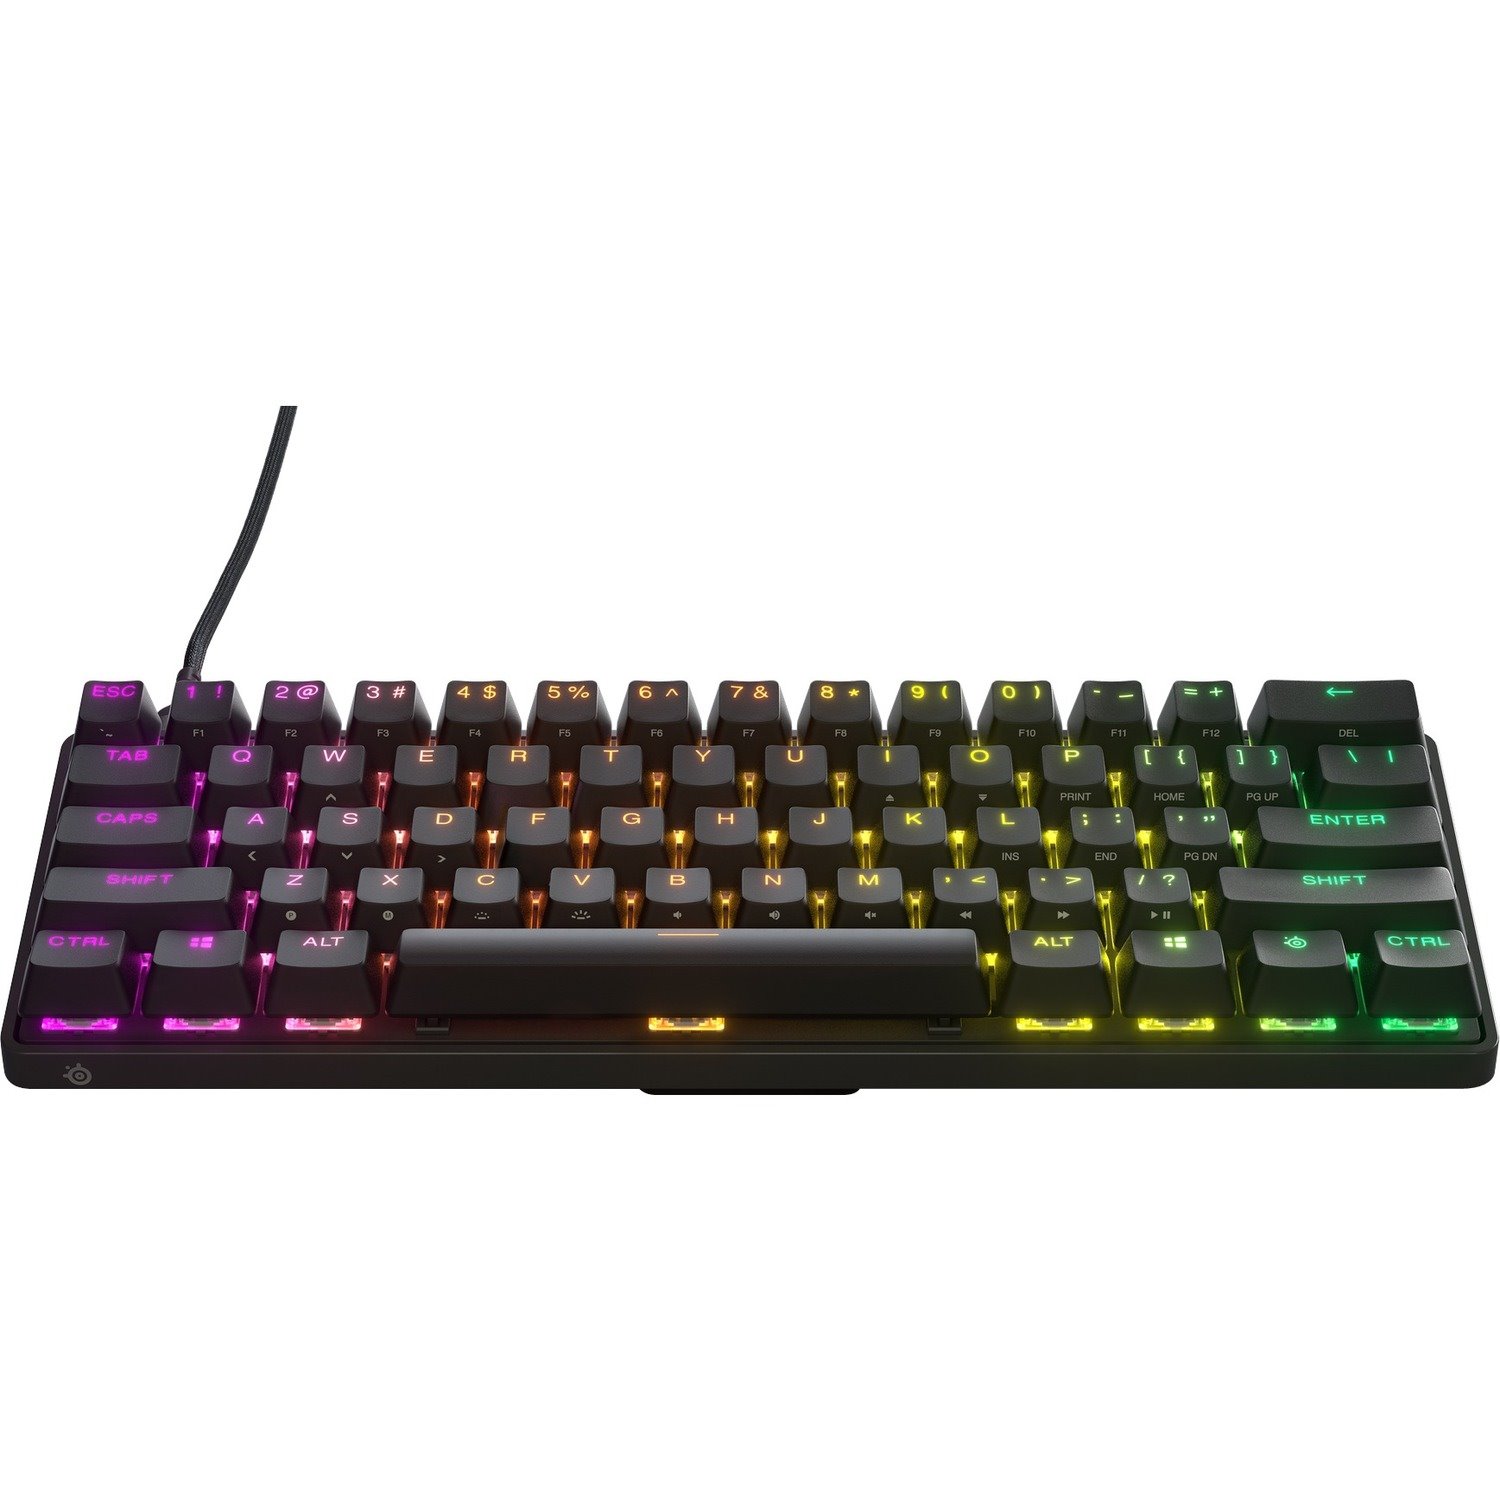 SteelSeries Apex Pro Mini Gaming Keyboard - Cable Connectivity - USB Type C Interface - RGB LED - English (US) - Black